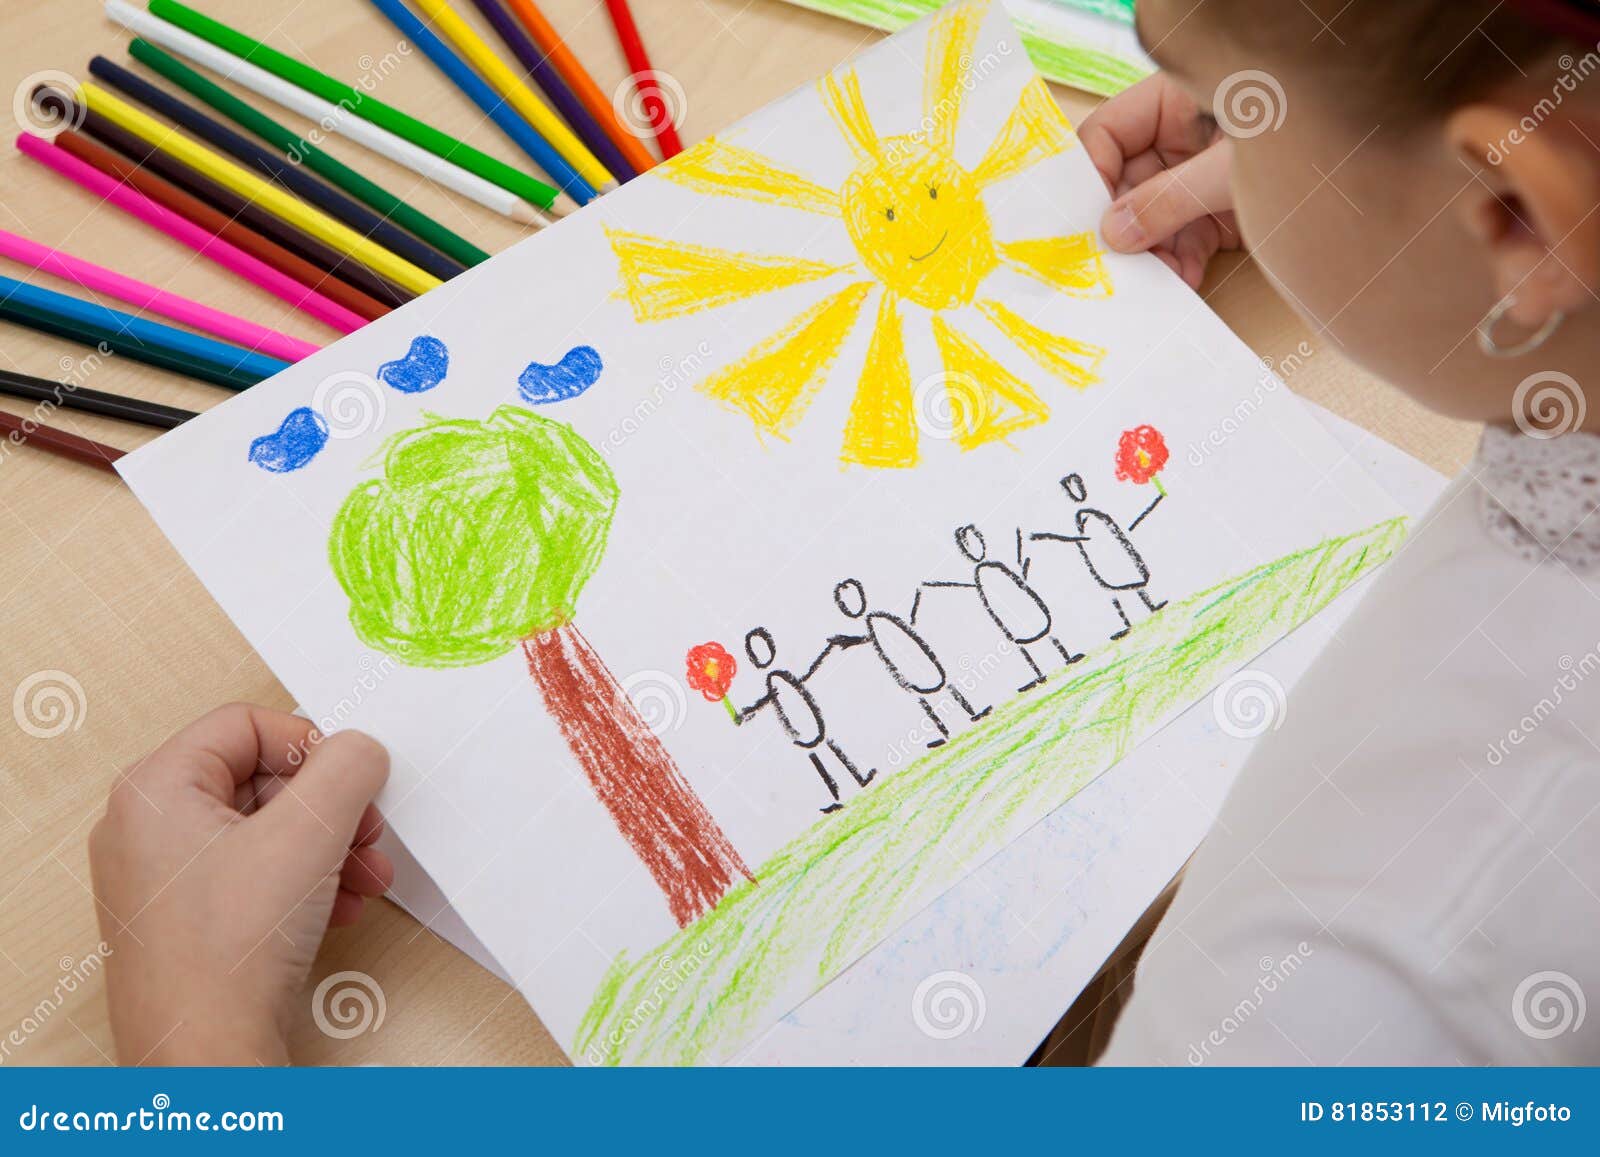 https://thumbs.dreamstime.com/z/children-s-drawing-pencils-girl-watching-pencil-sun-summer-nature-nature-conservancy-peace-81853112.jpg